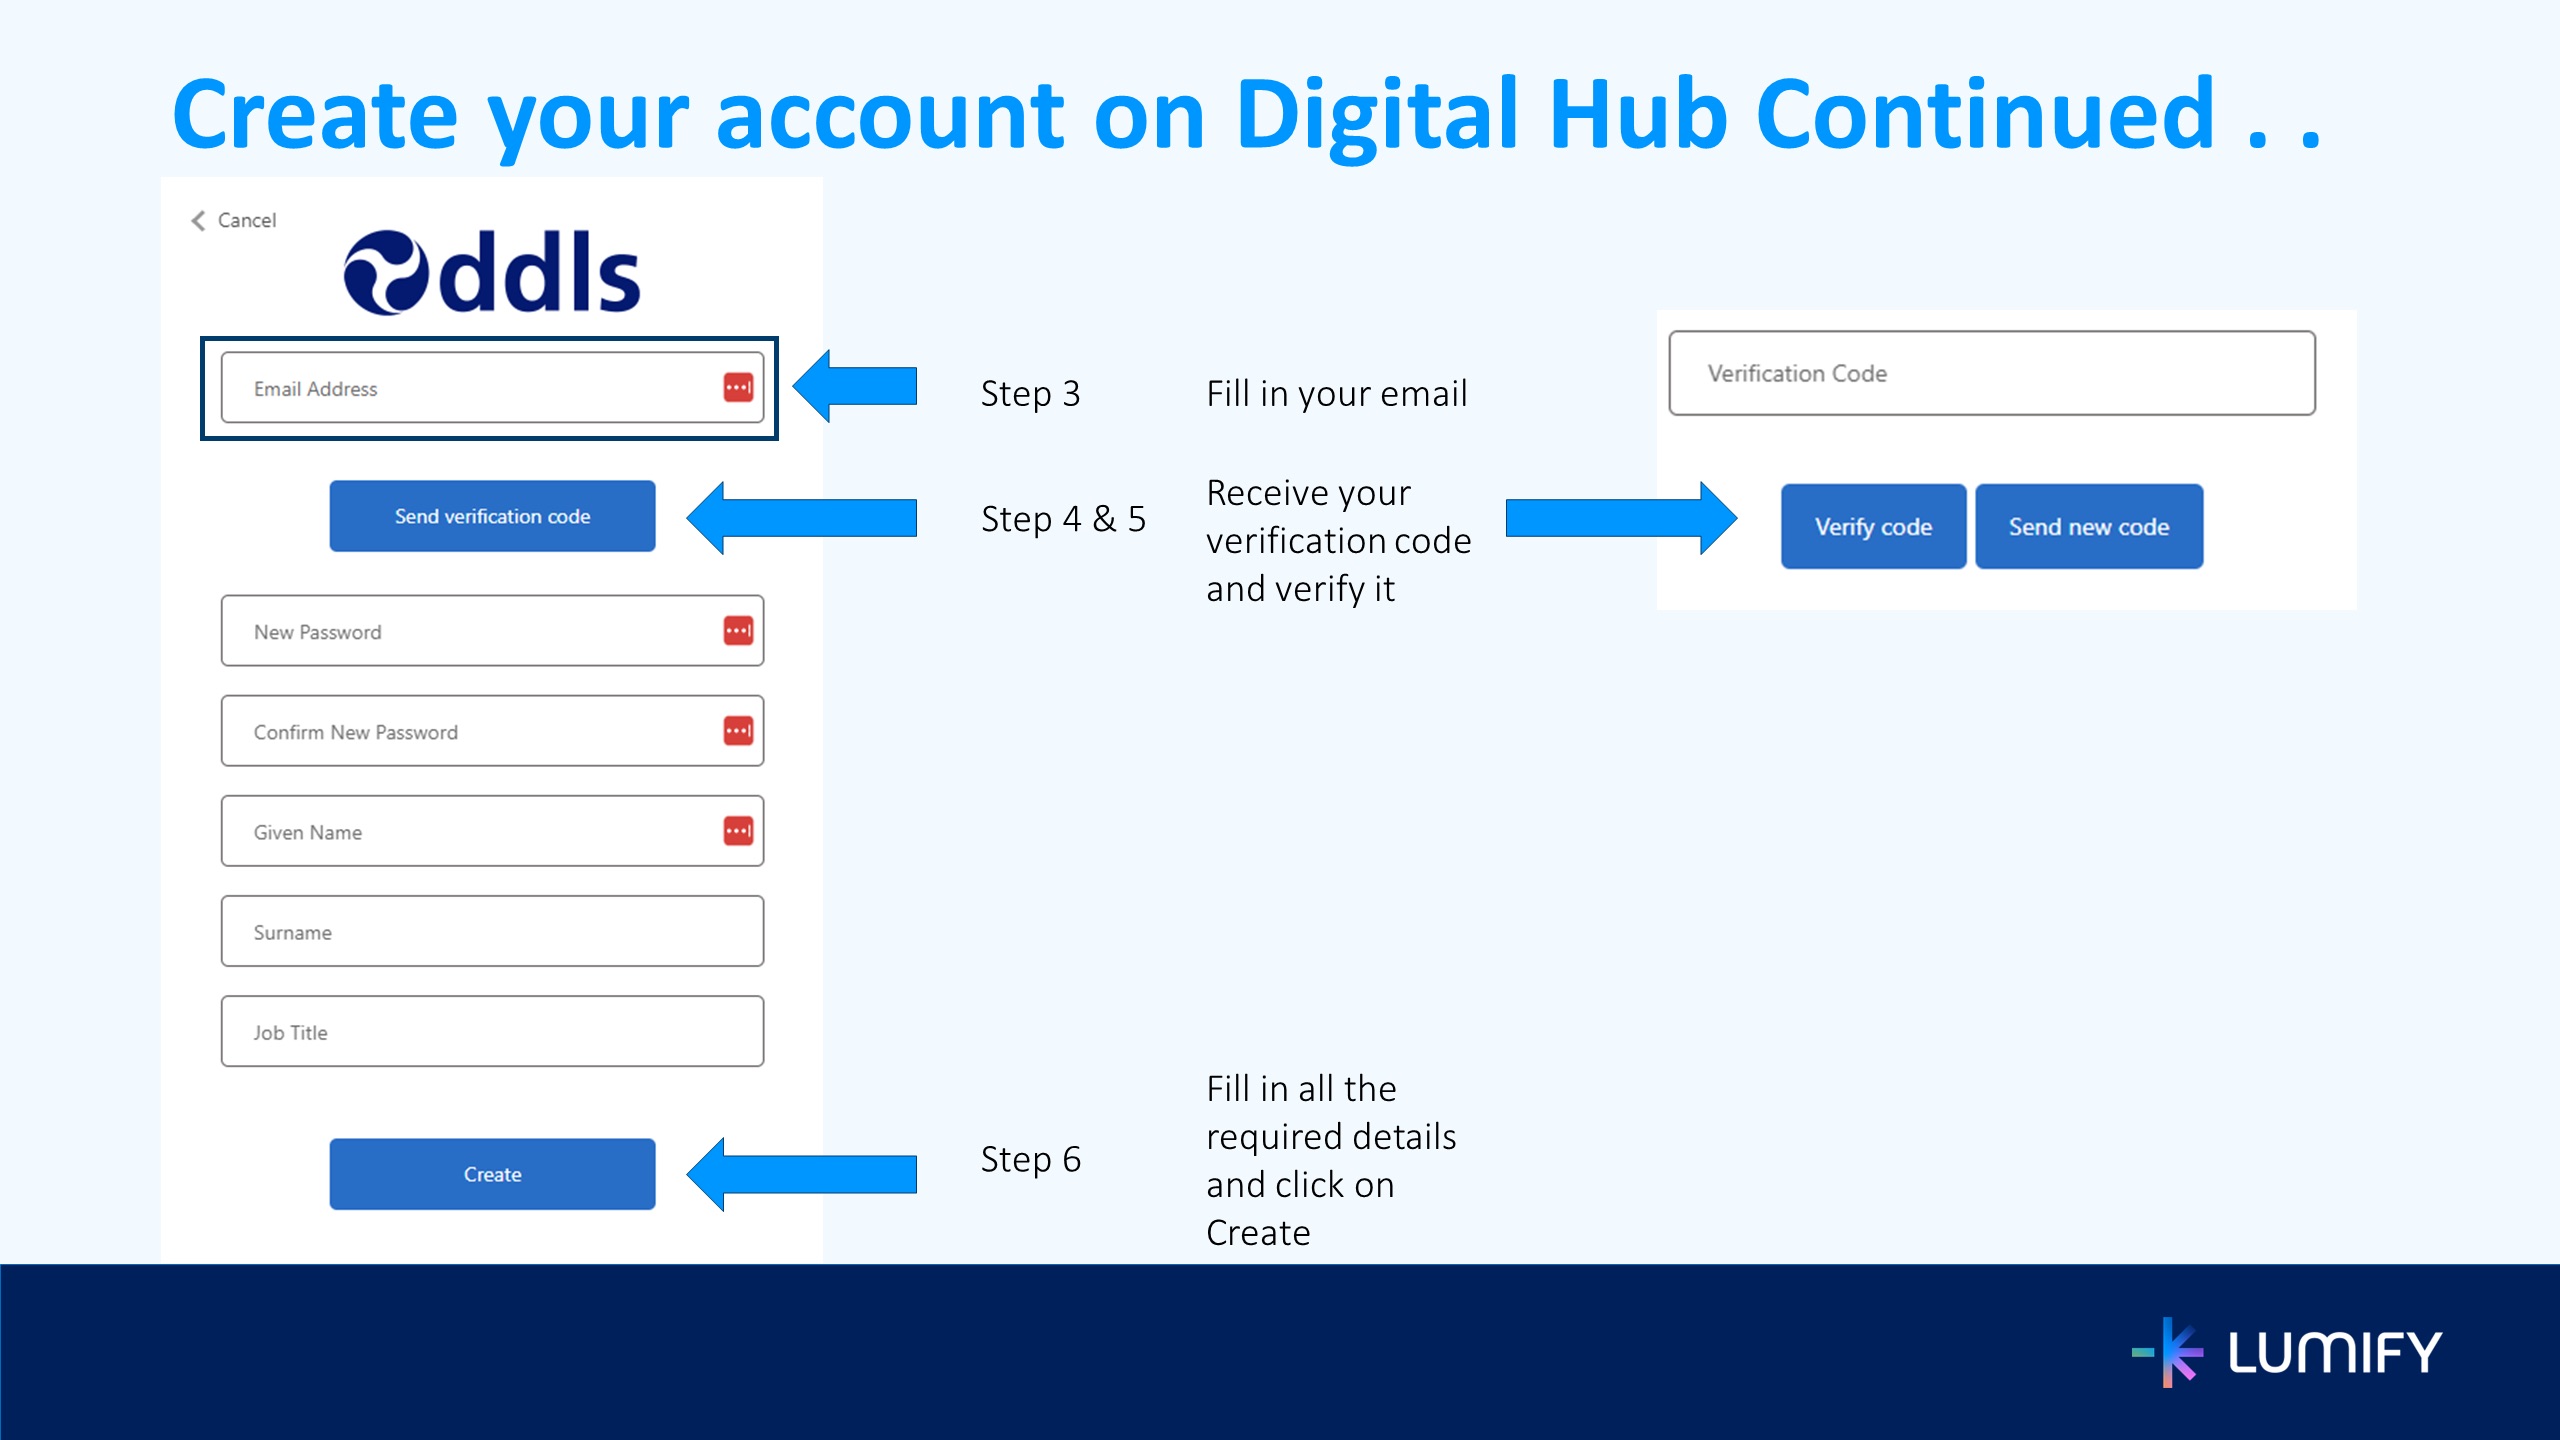 How to sign up on Digital Hub?